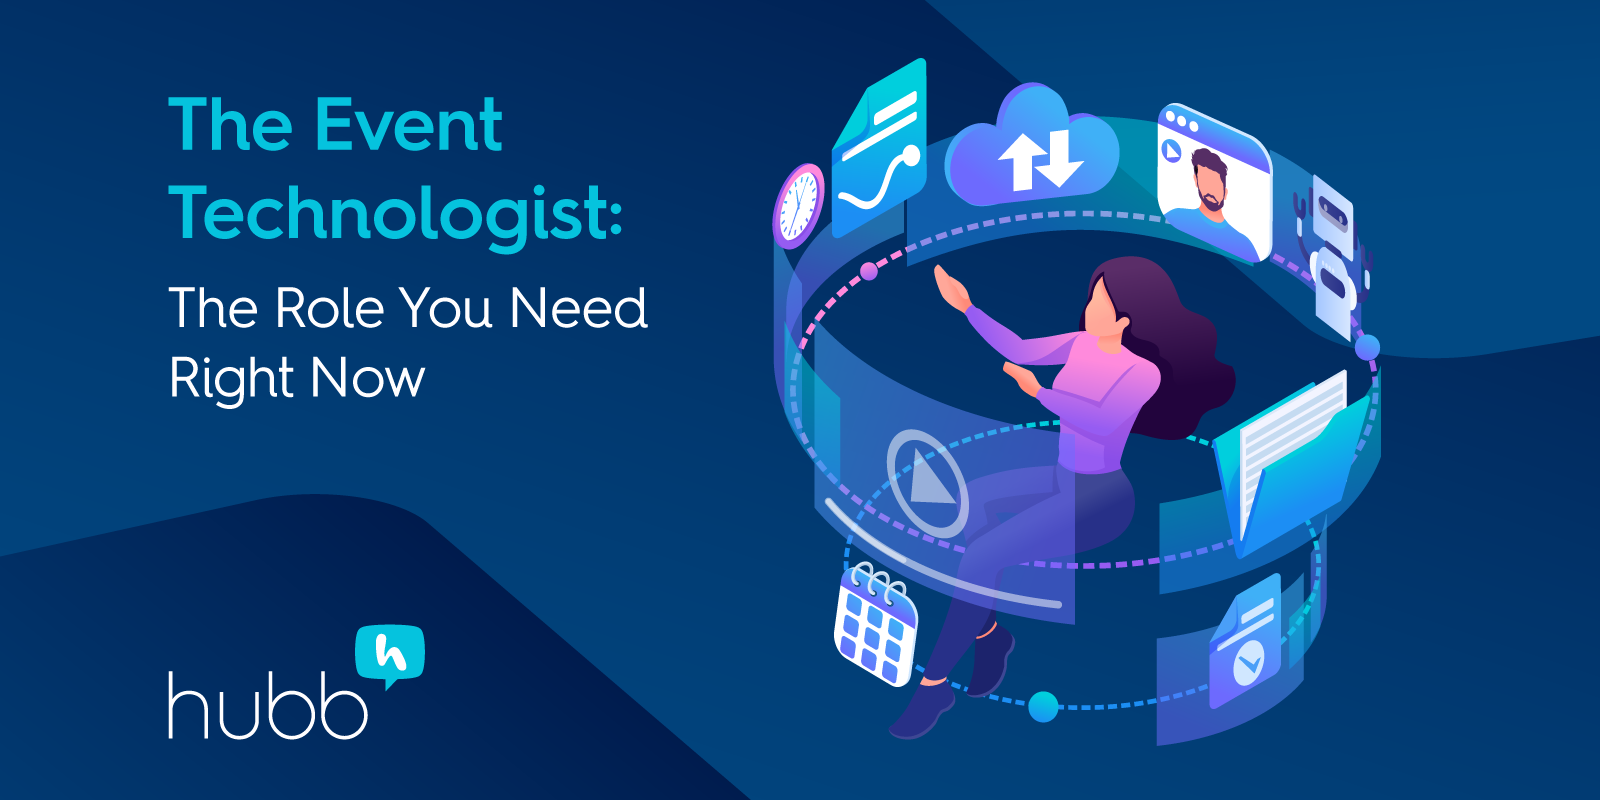 The Event Technologist:  The Role You Need Right Now